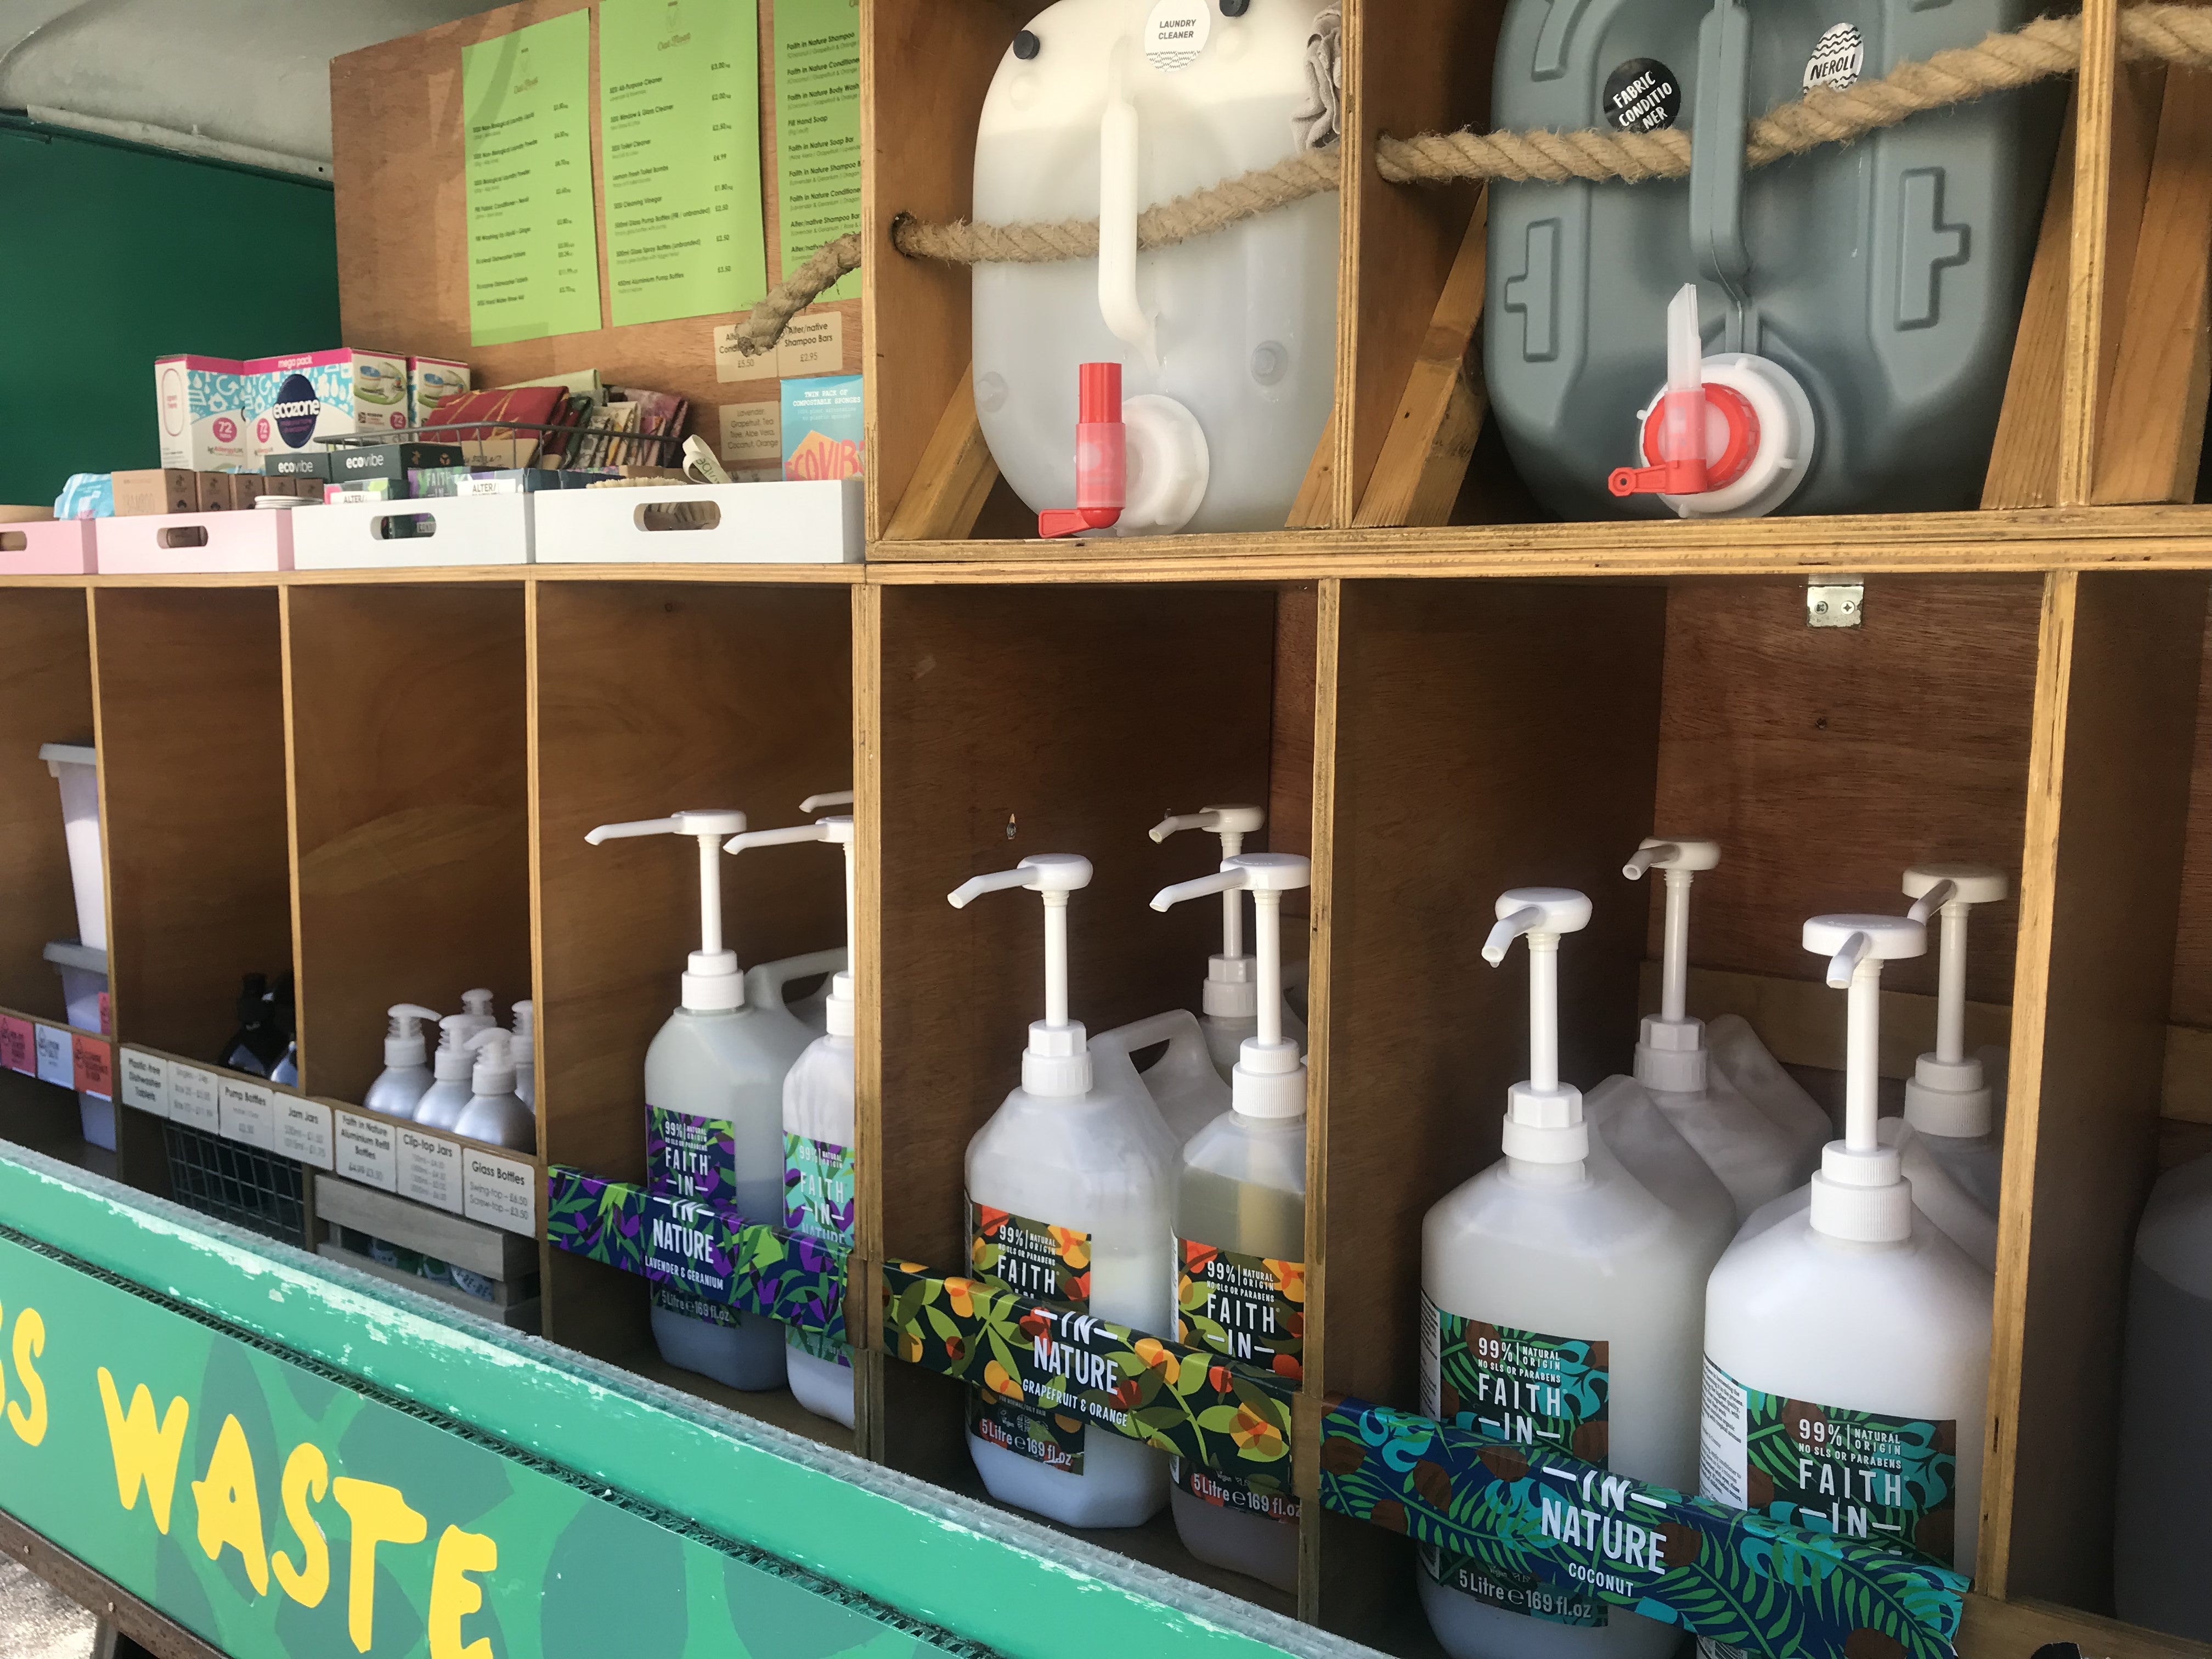 Based in Bristol, Oat Float is a colourful vintage milk float that delivers plastic-free refill products directly to customers’ doors (and containers!).